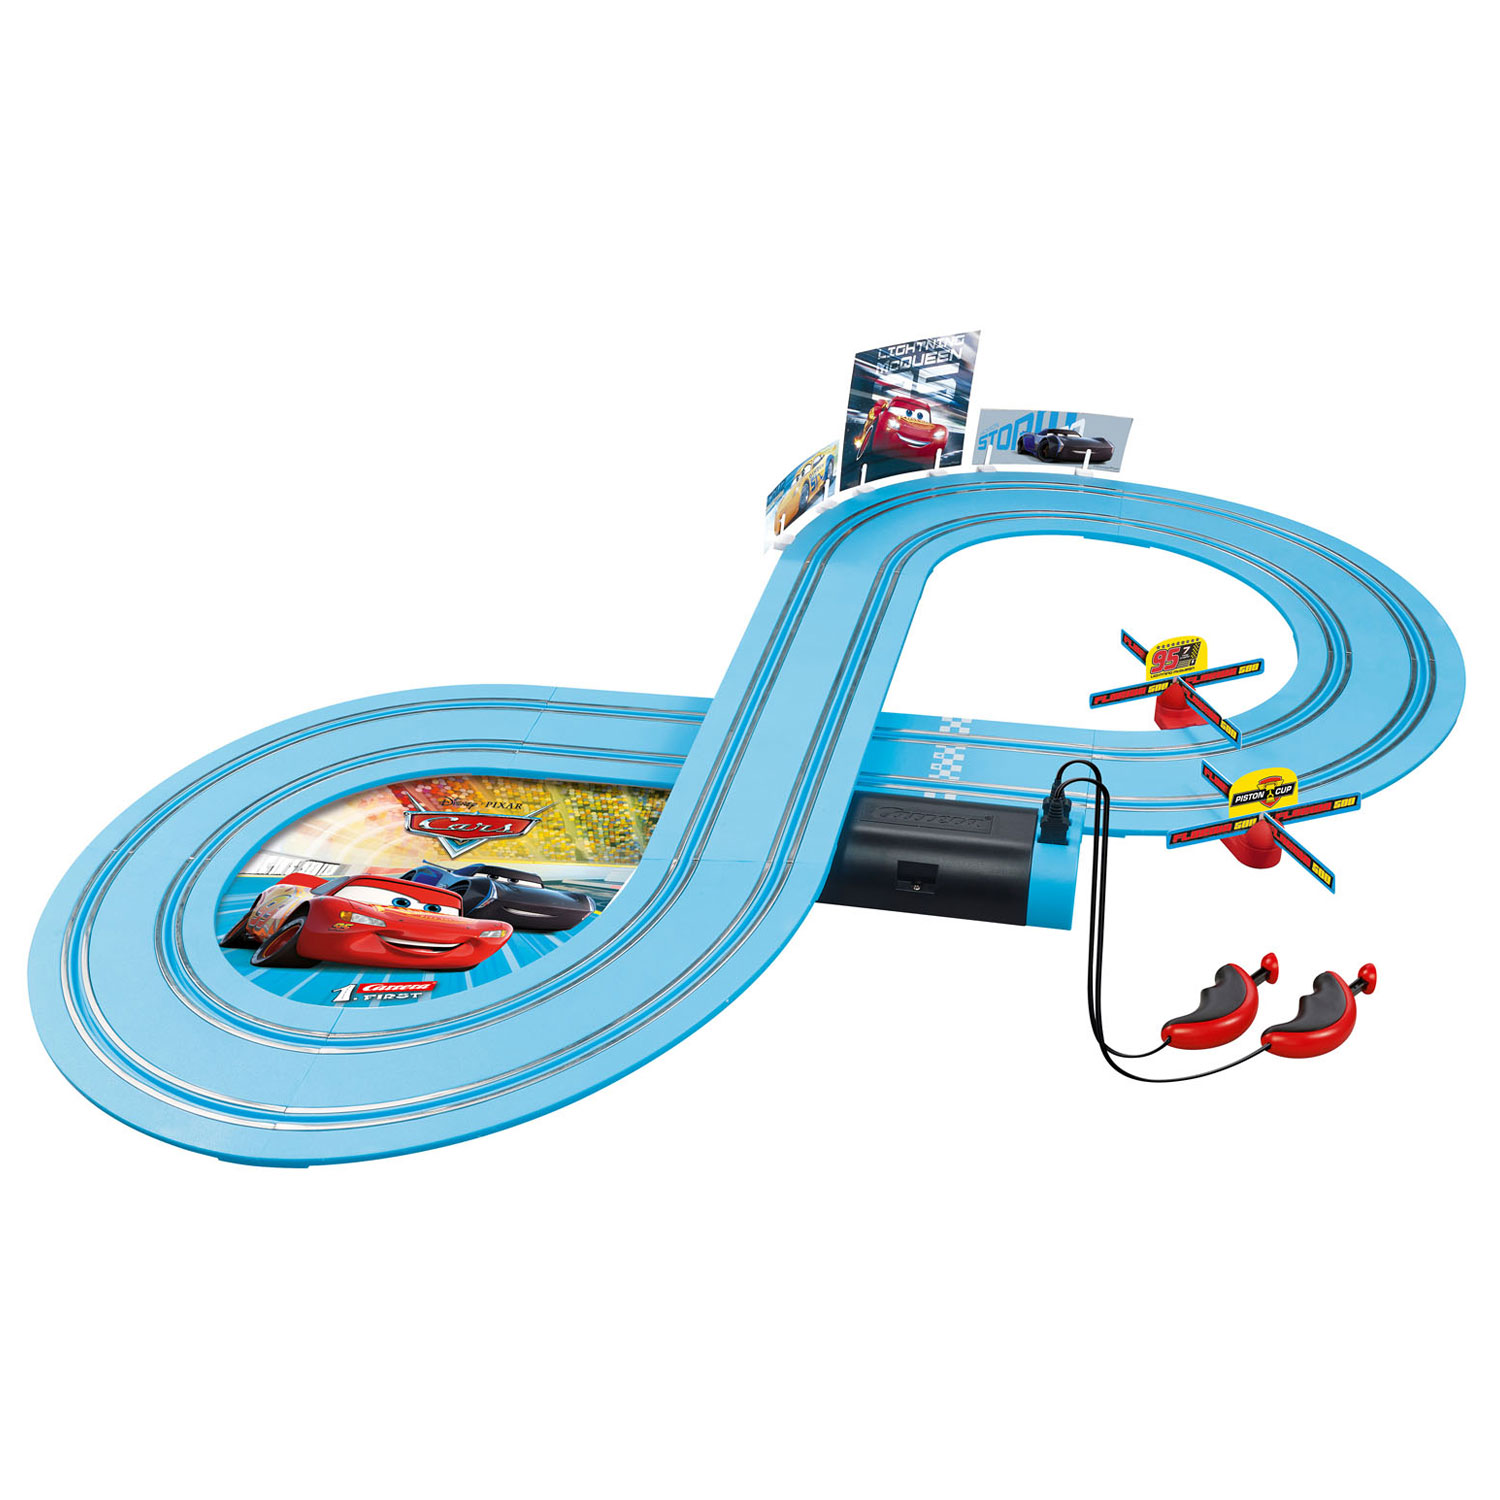 Carrera First Racetrack – Cars Power Duel